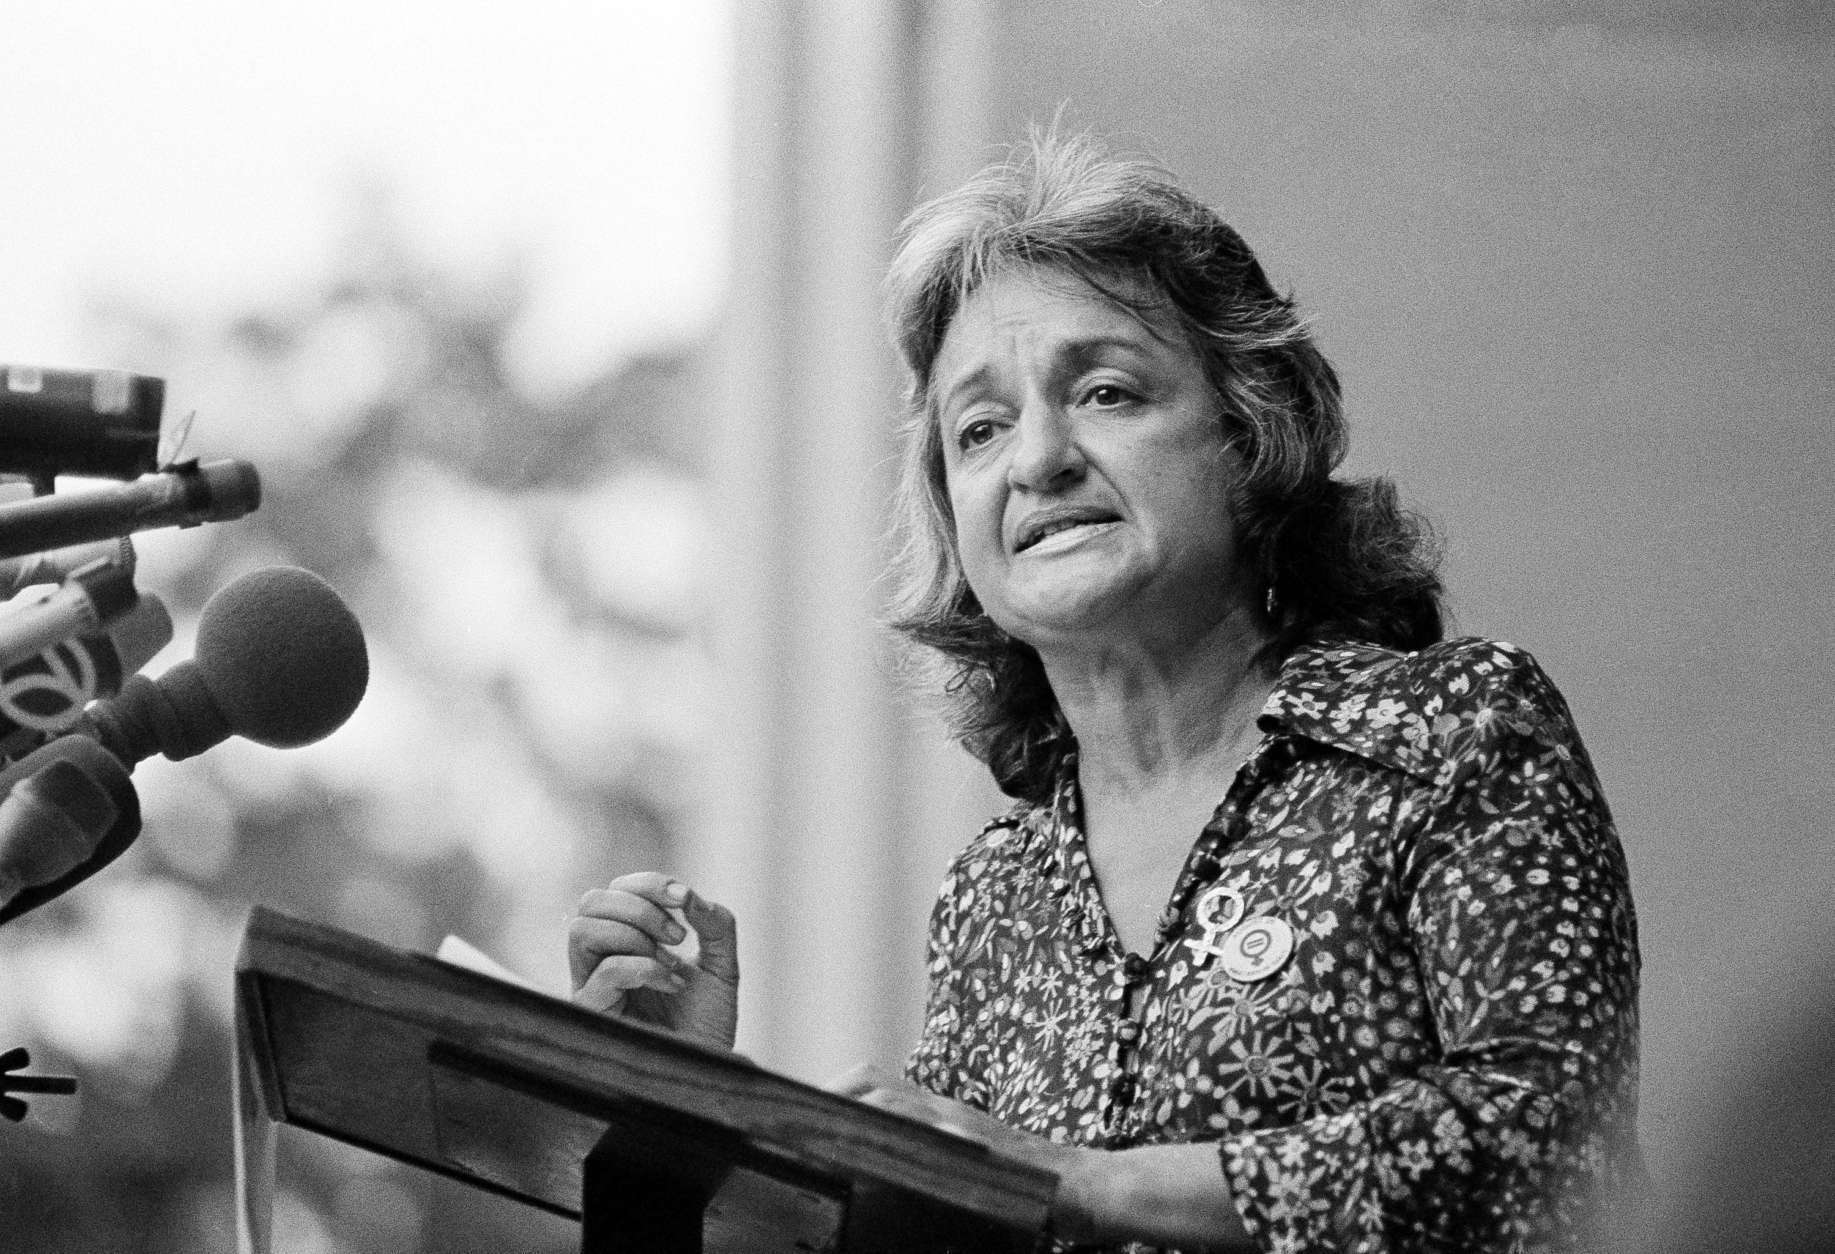 Betty Friedan, co-founder of National Organization for Women (NOW), speaks during the Women's Stirke for Eqality event in New York's Central Park on Aug. 26, 1970, the 50th anniversary of woman suffrage.  Some 5,000 marchers paraded up Fifth Avenue in the women's march for equality.  Friedan, whose manifesto "The Feminine Mystique" became a best seller in the 1960s and laid the groundwork for the modern feminist movement, died Saturday, Feb. 4, 2006 her birthday. She was 85.  (AP Photo)